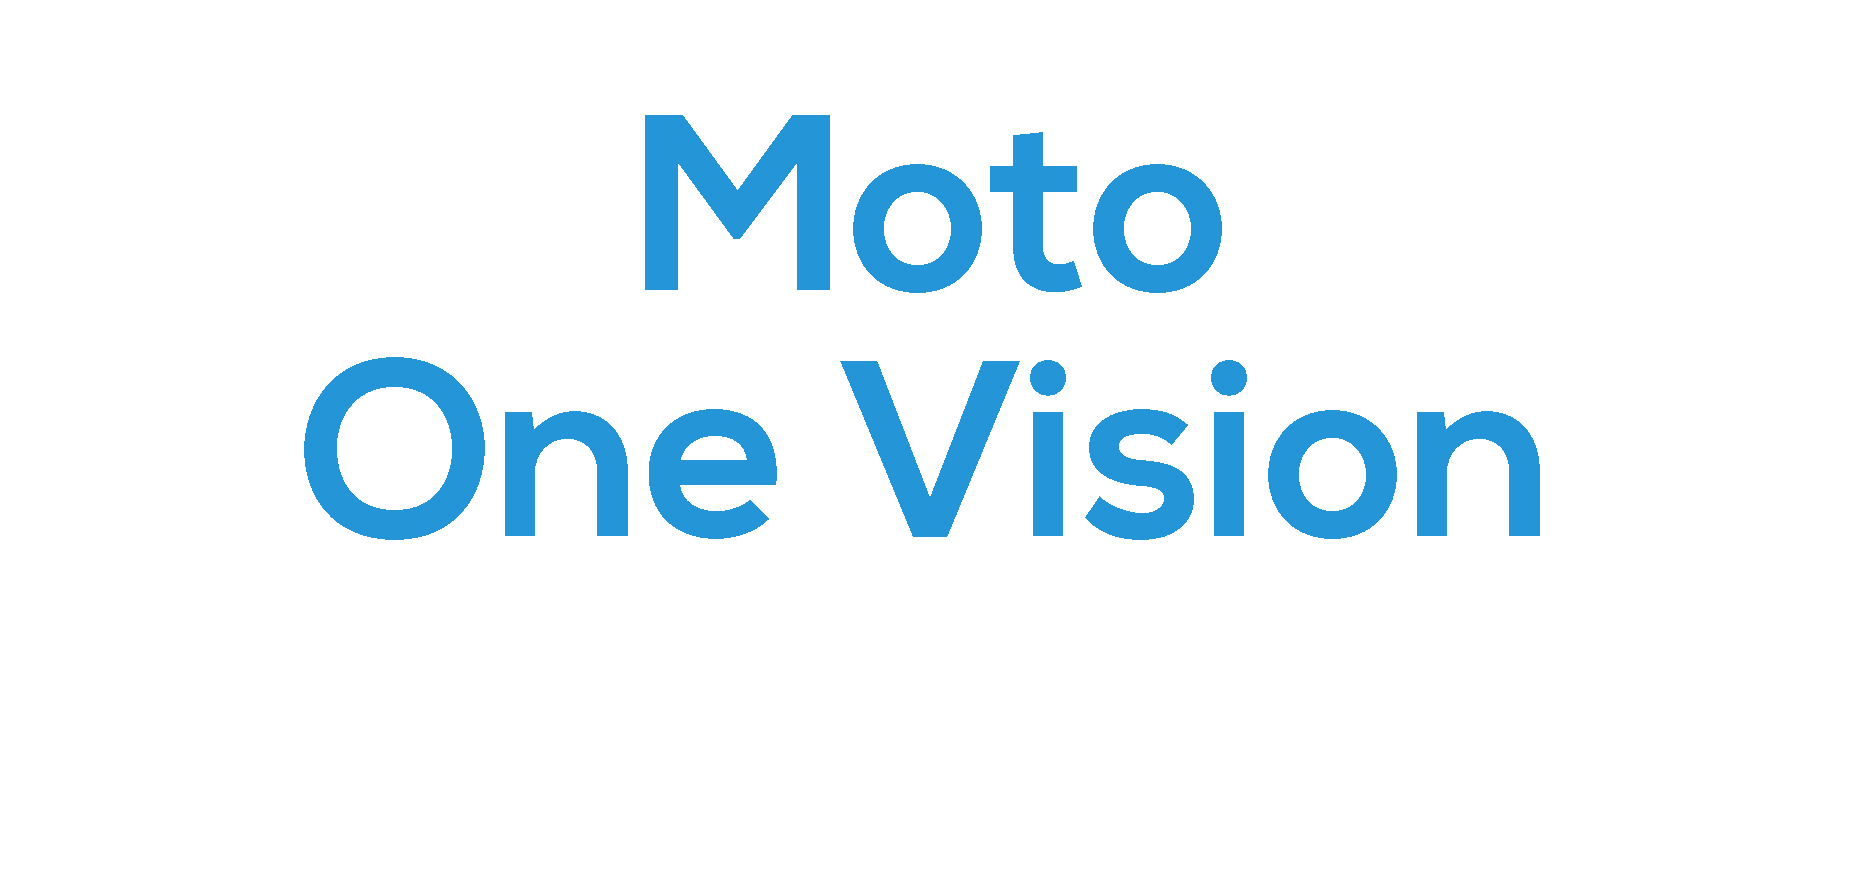 One Vision 2019 (XT1970)